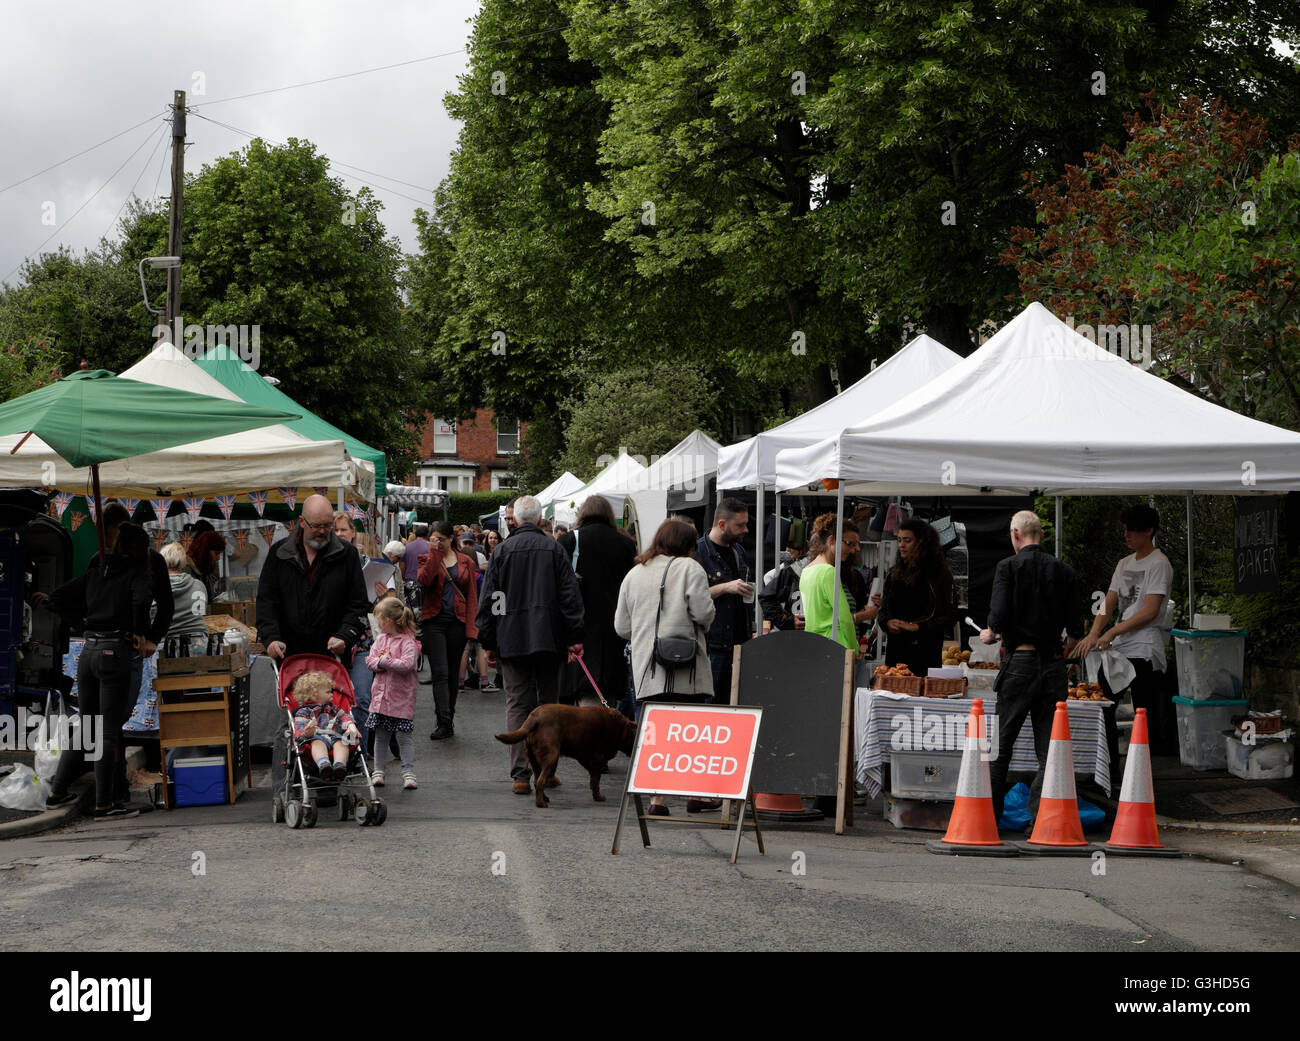 Nether Edge farmers market in Sheffield England June 2016, suburban community event  Road closed Stock Photo